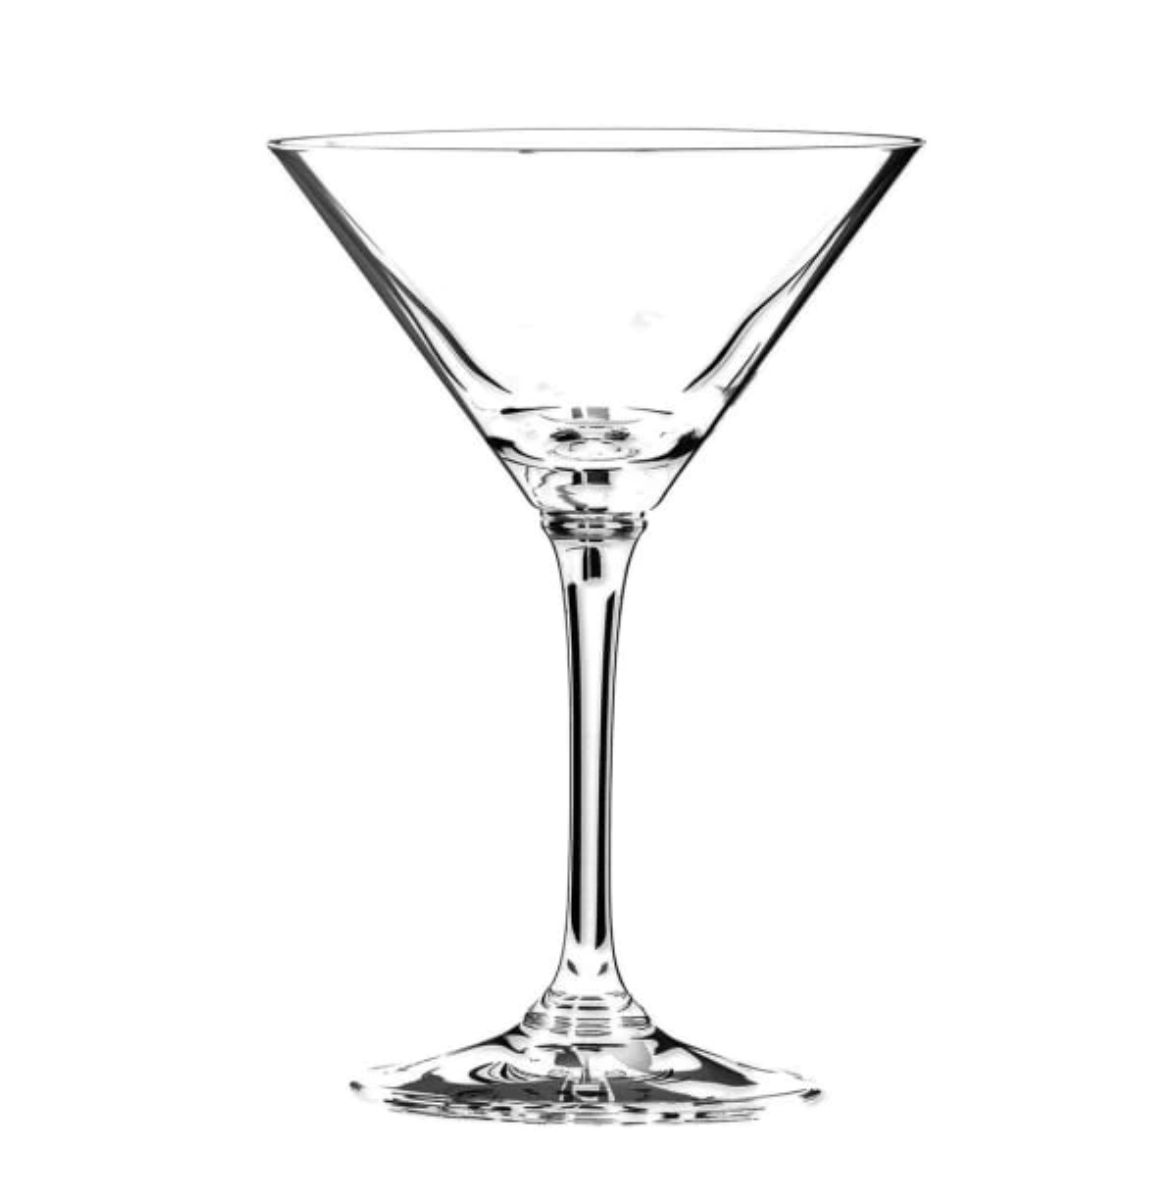 Riedel cocktail glass sommelier martini 210 ml 4400/17